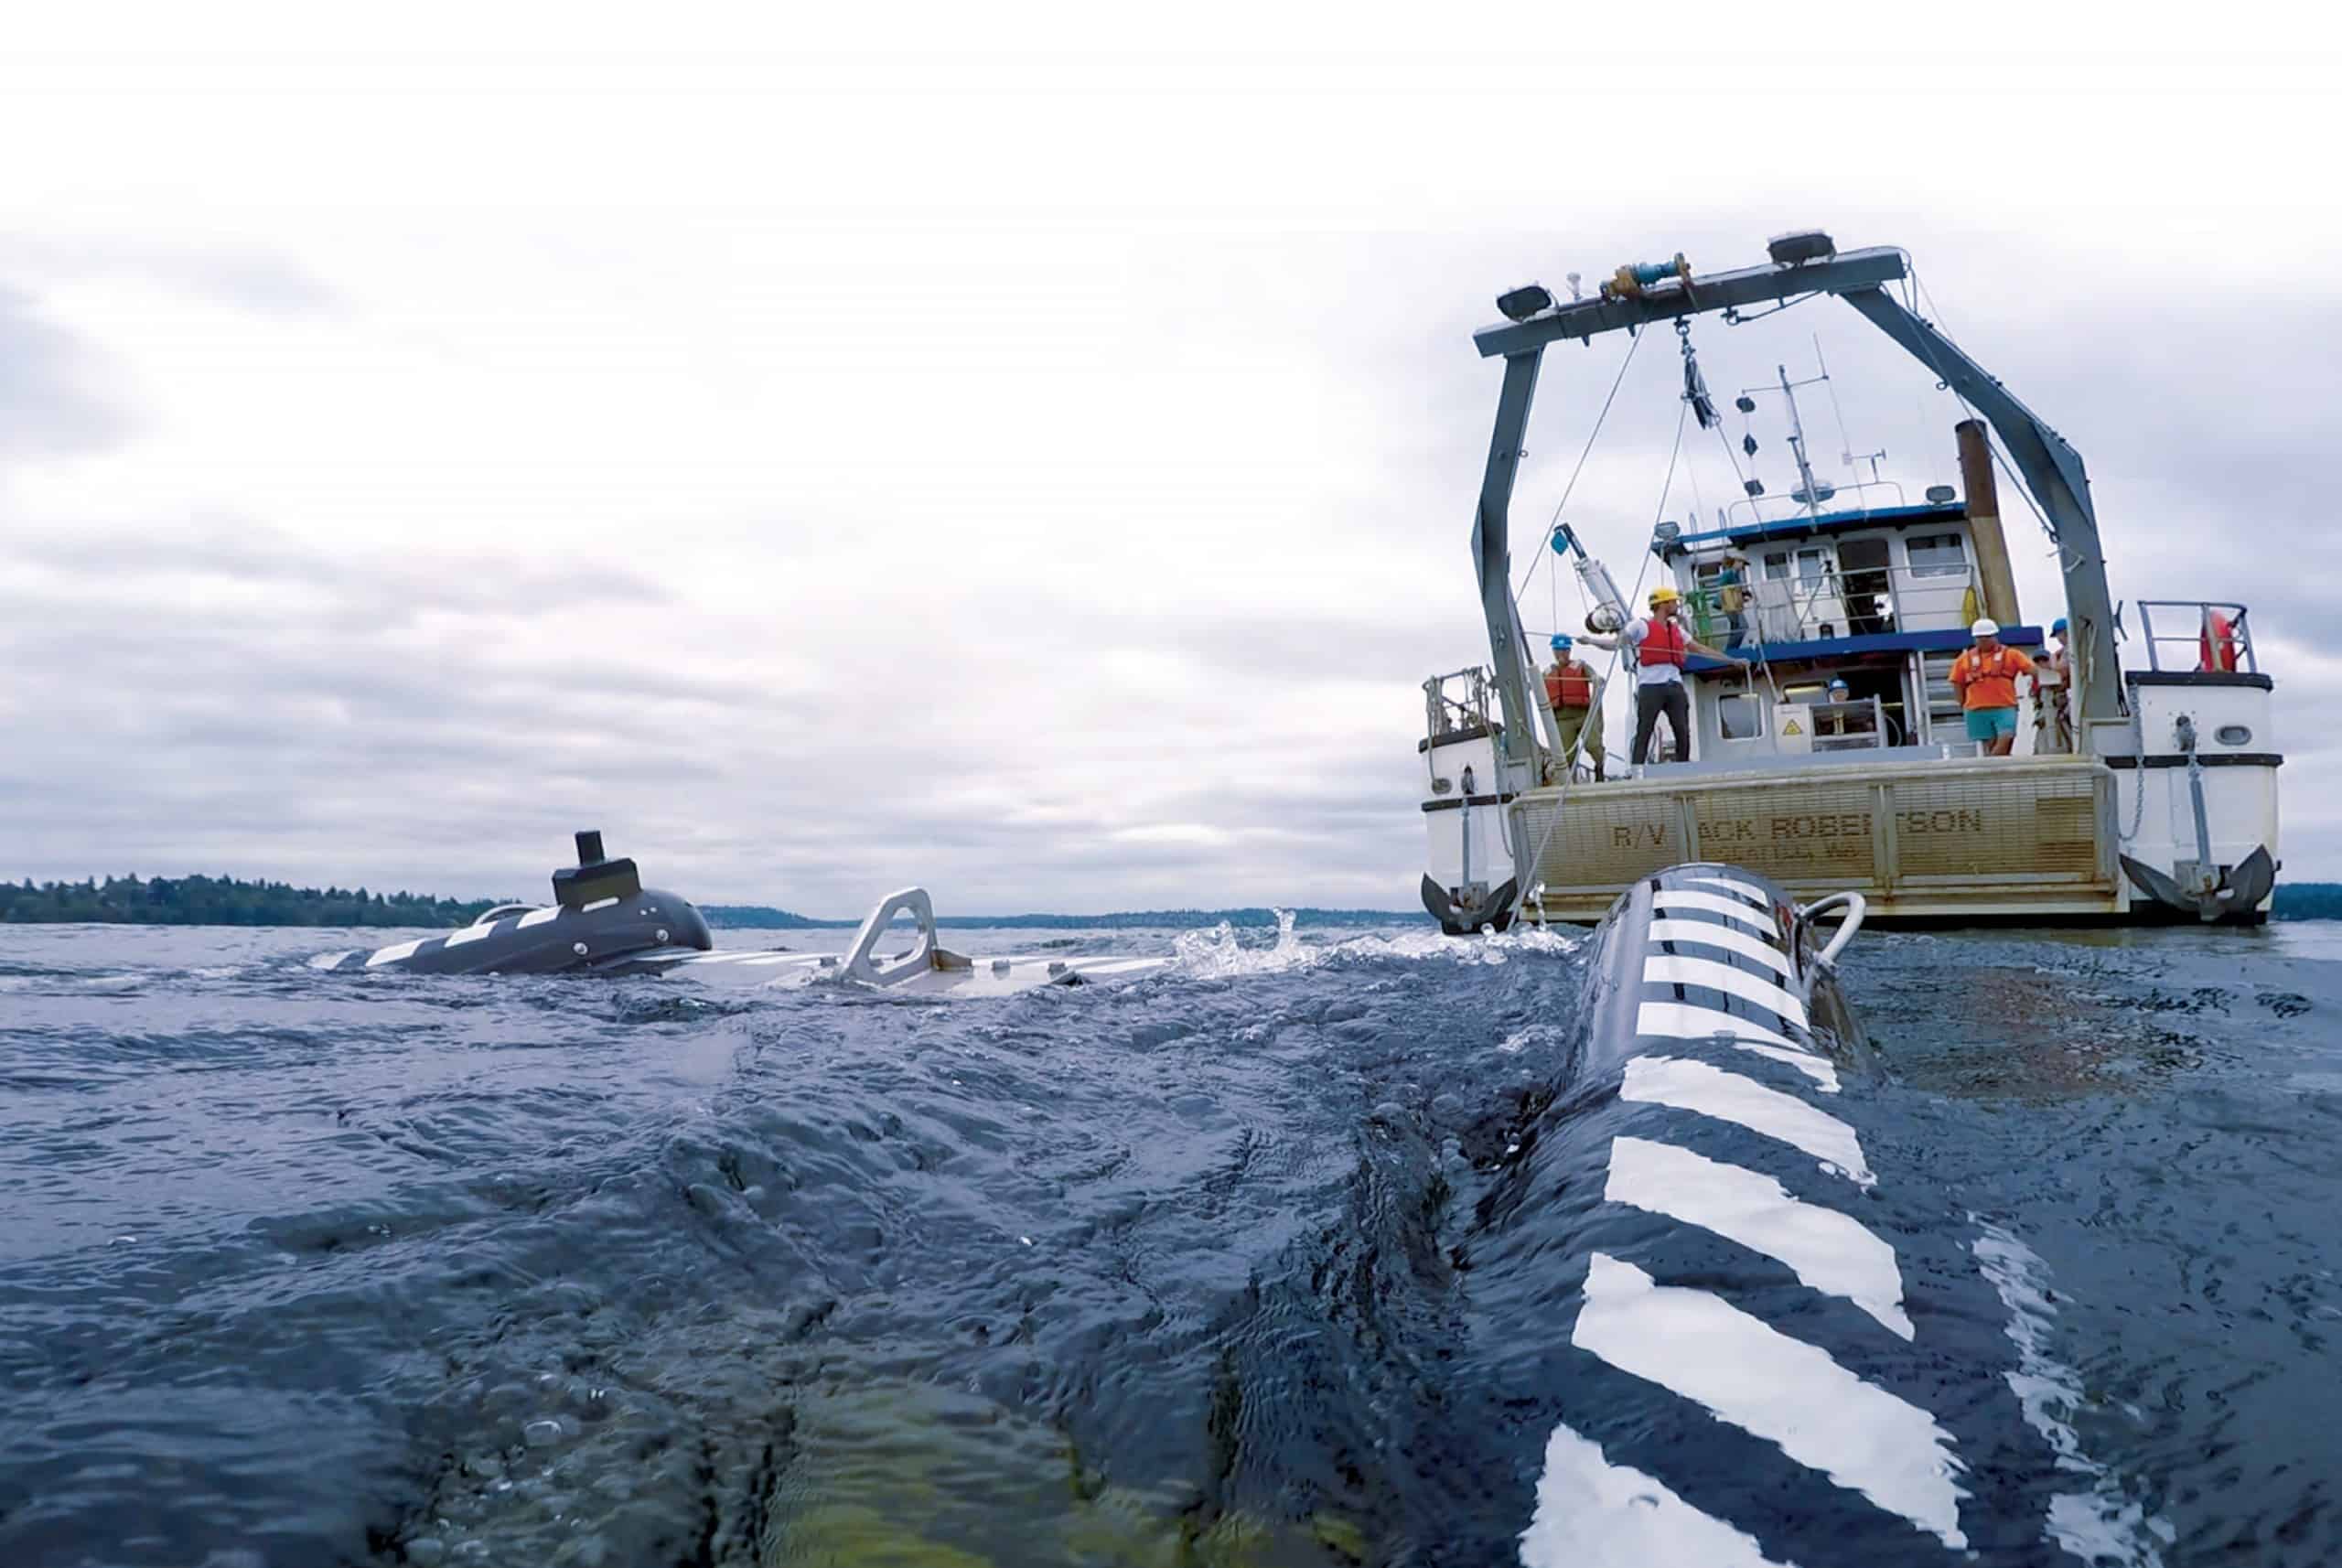 Shot taken with a camera mounted to the Multi-Sensor Towbody (MuST) instrument as it emerges from the depths of Lake Washington, the Research Vessel Jack Robertson is in the background with several researchers on deck.